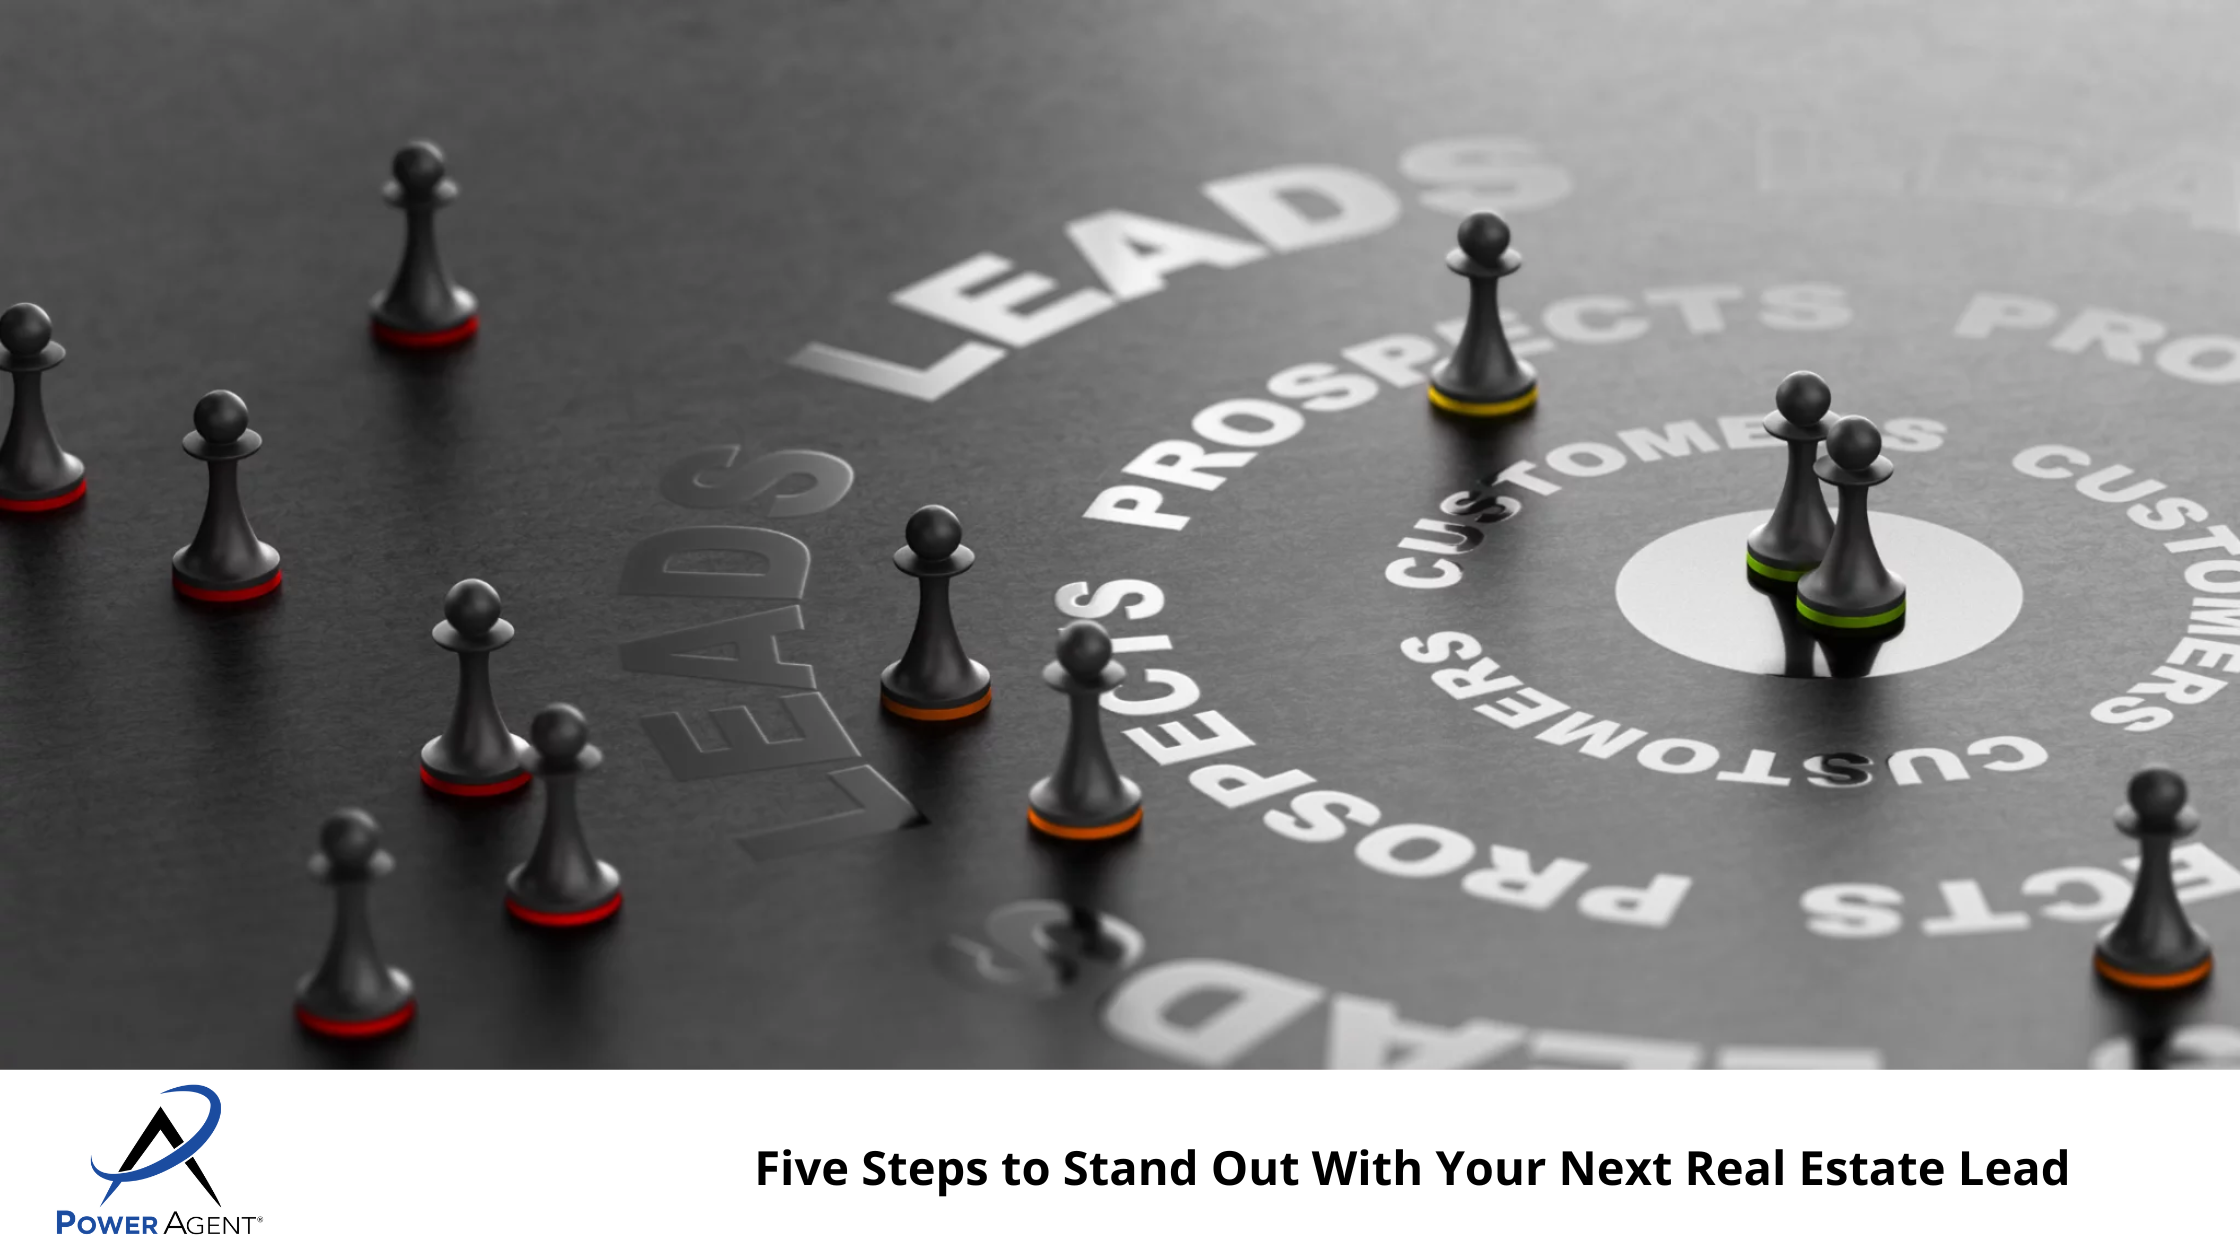 Five Steps to Stand Out With Your Next Real Estate Lead